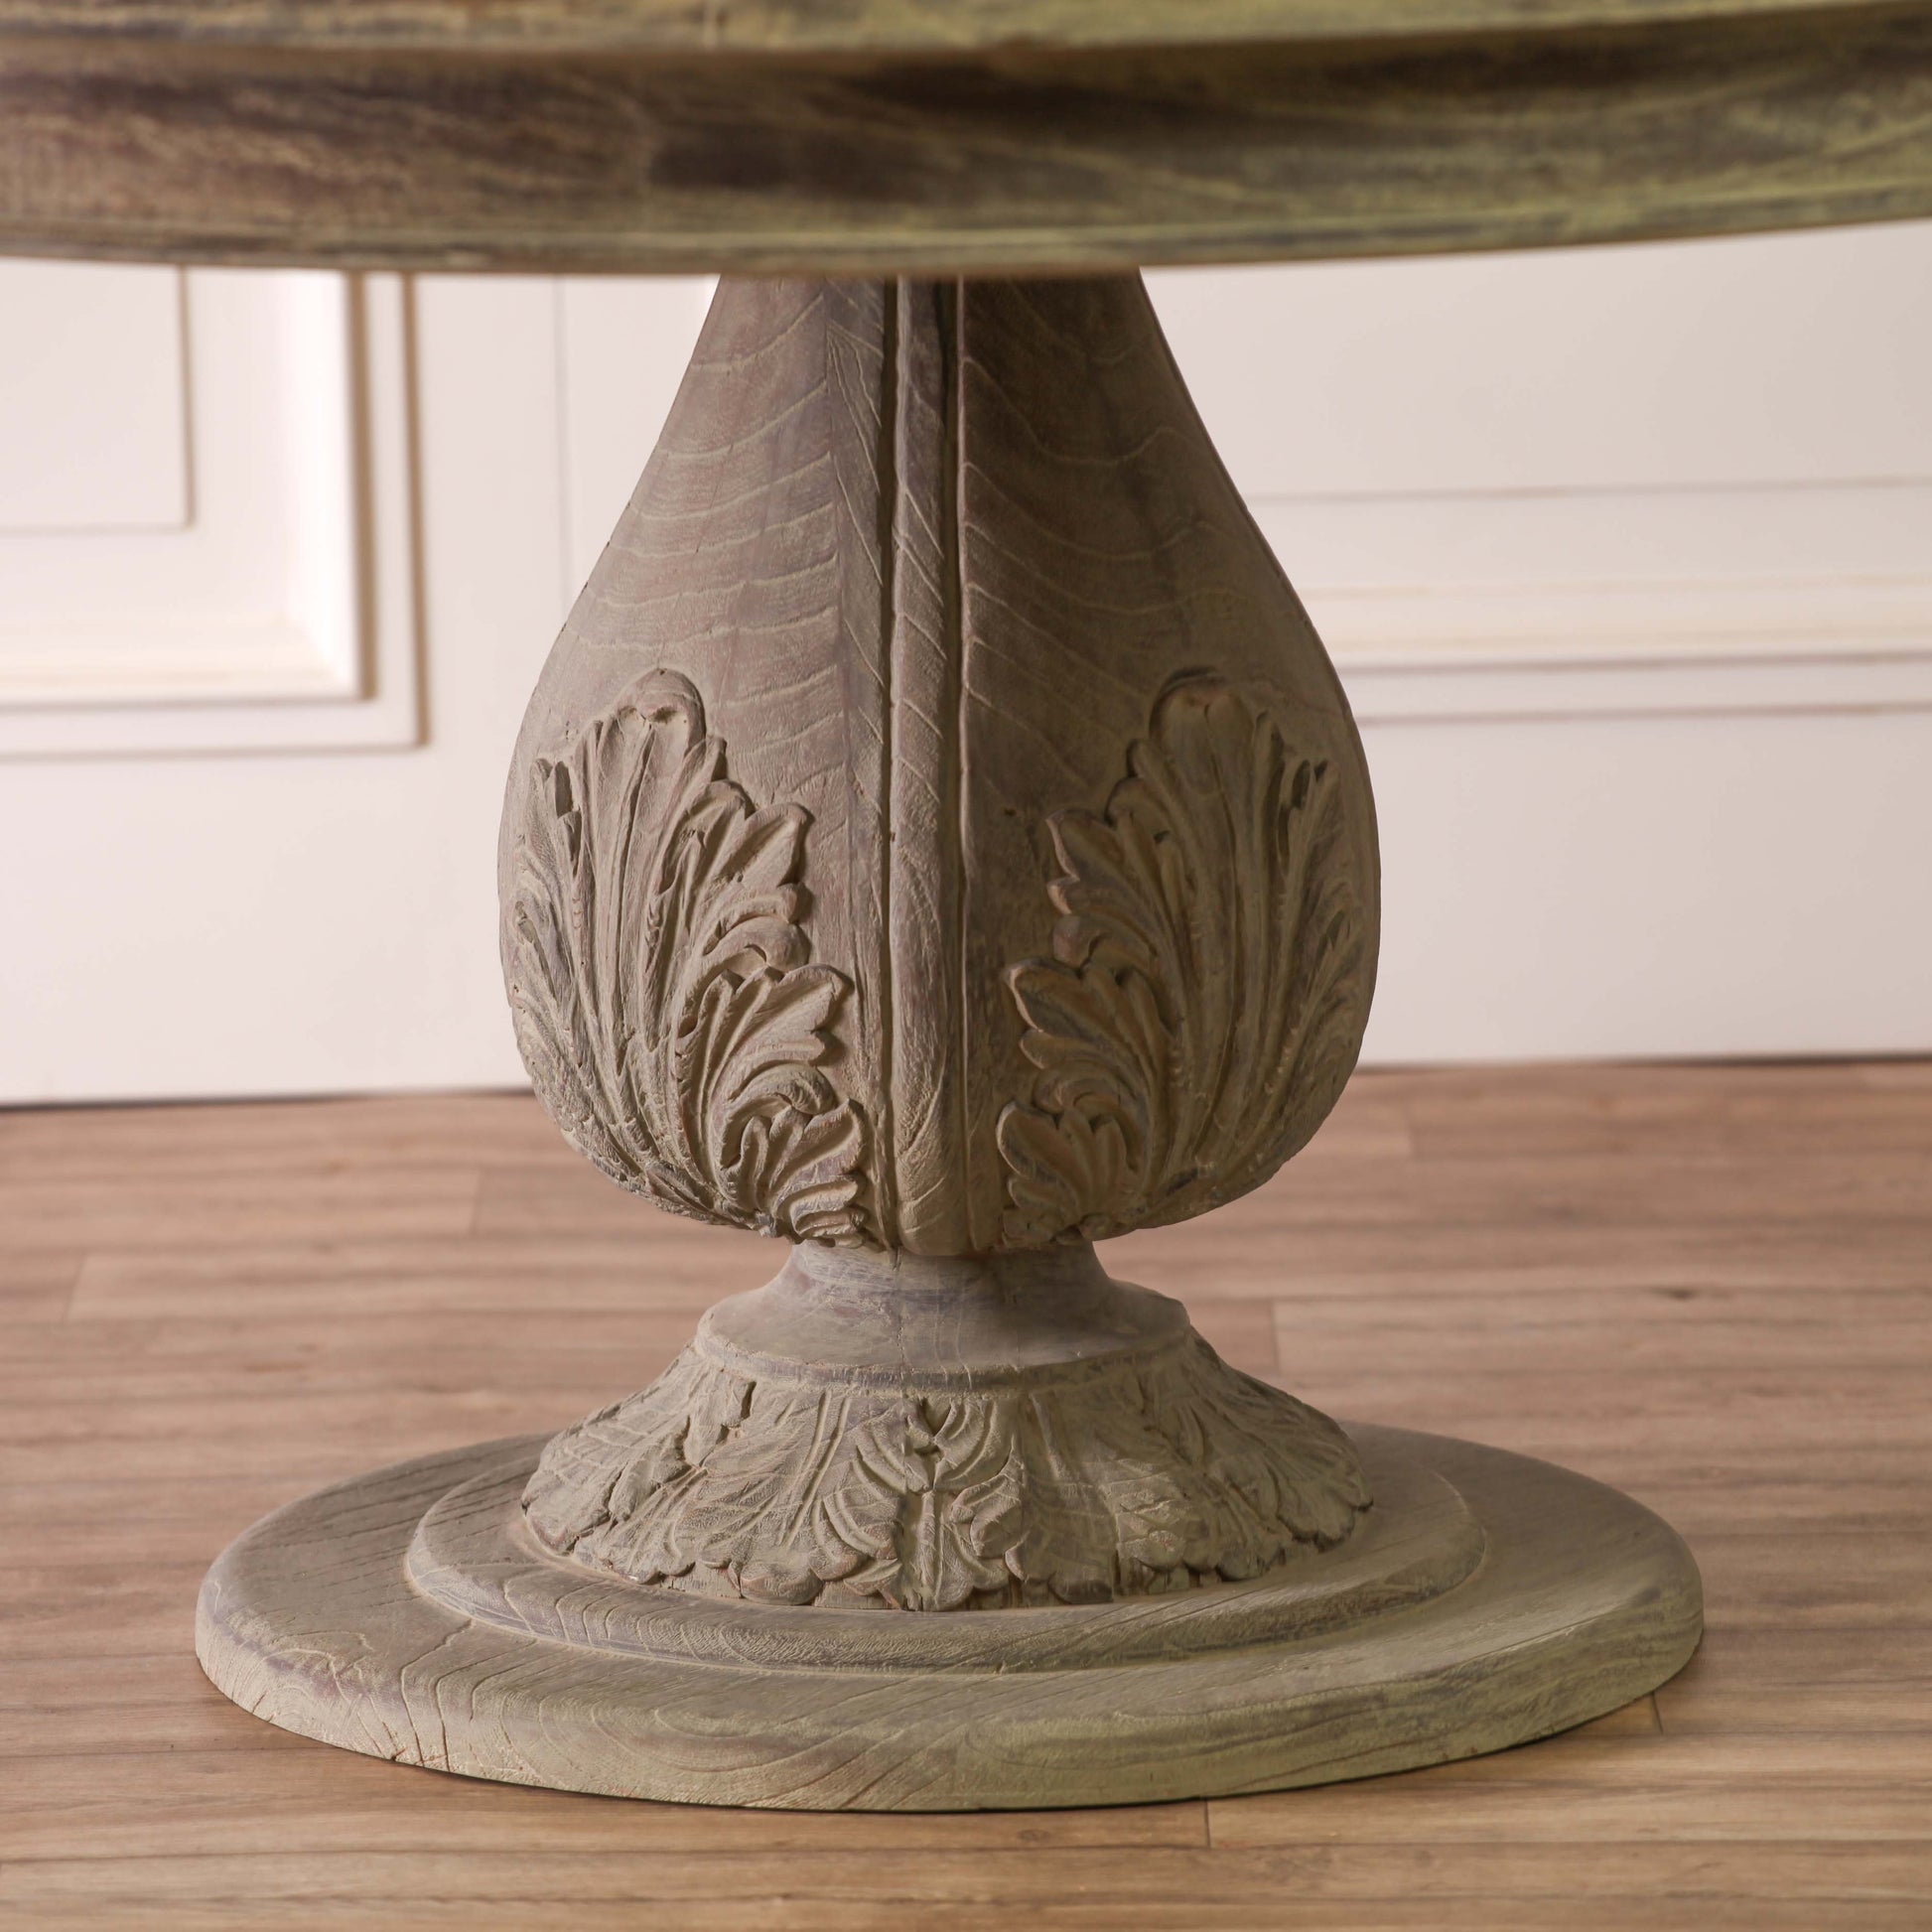 Rustic Washed 150cm Round Acorn Dining Table CasaFenix